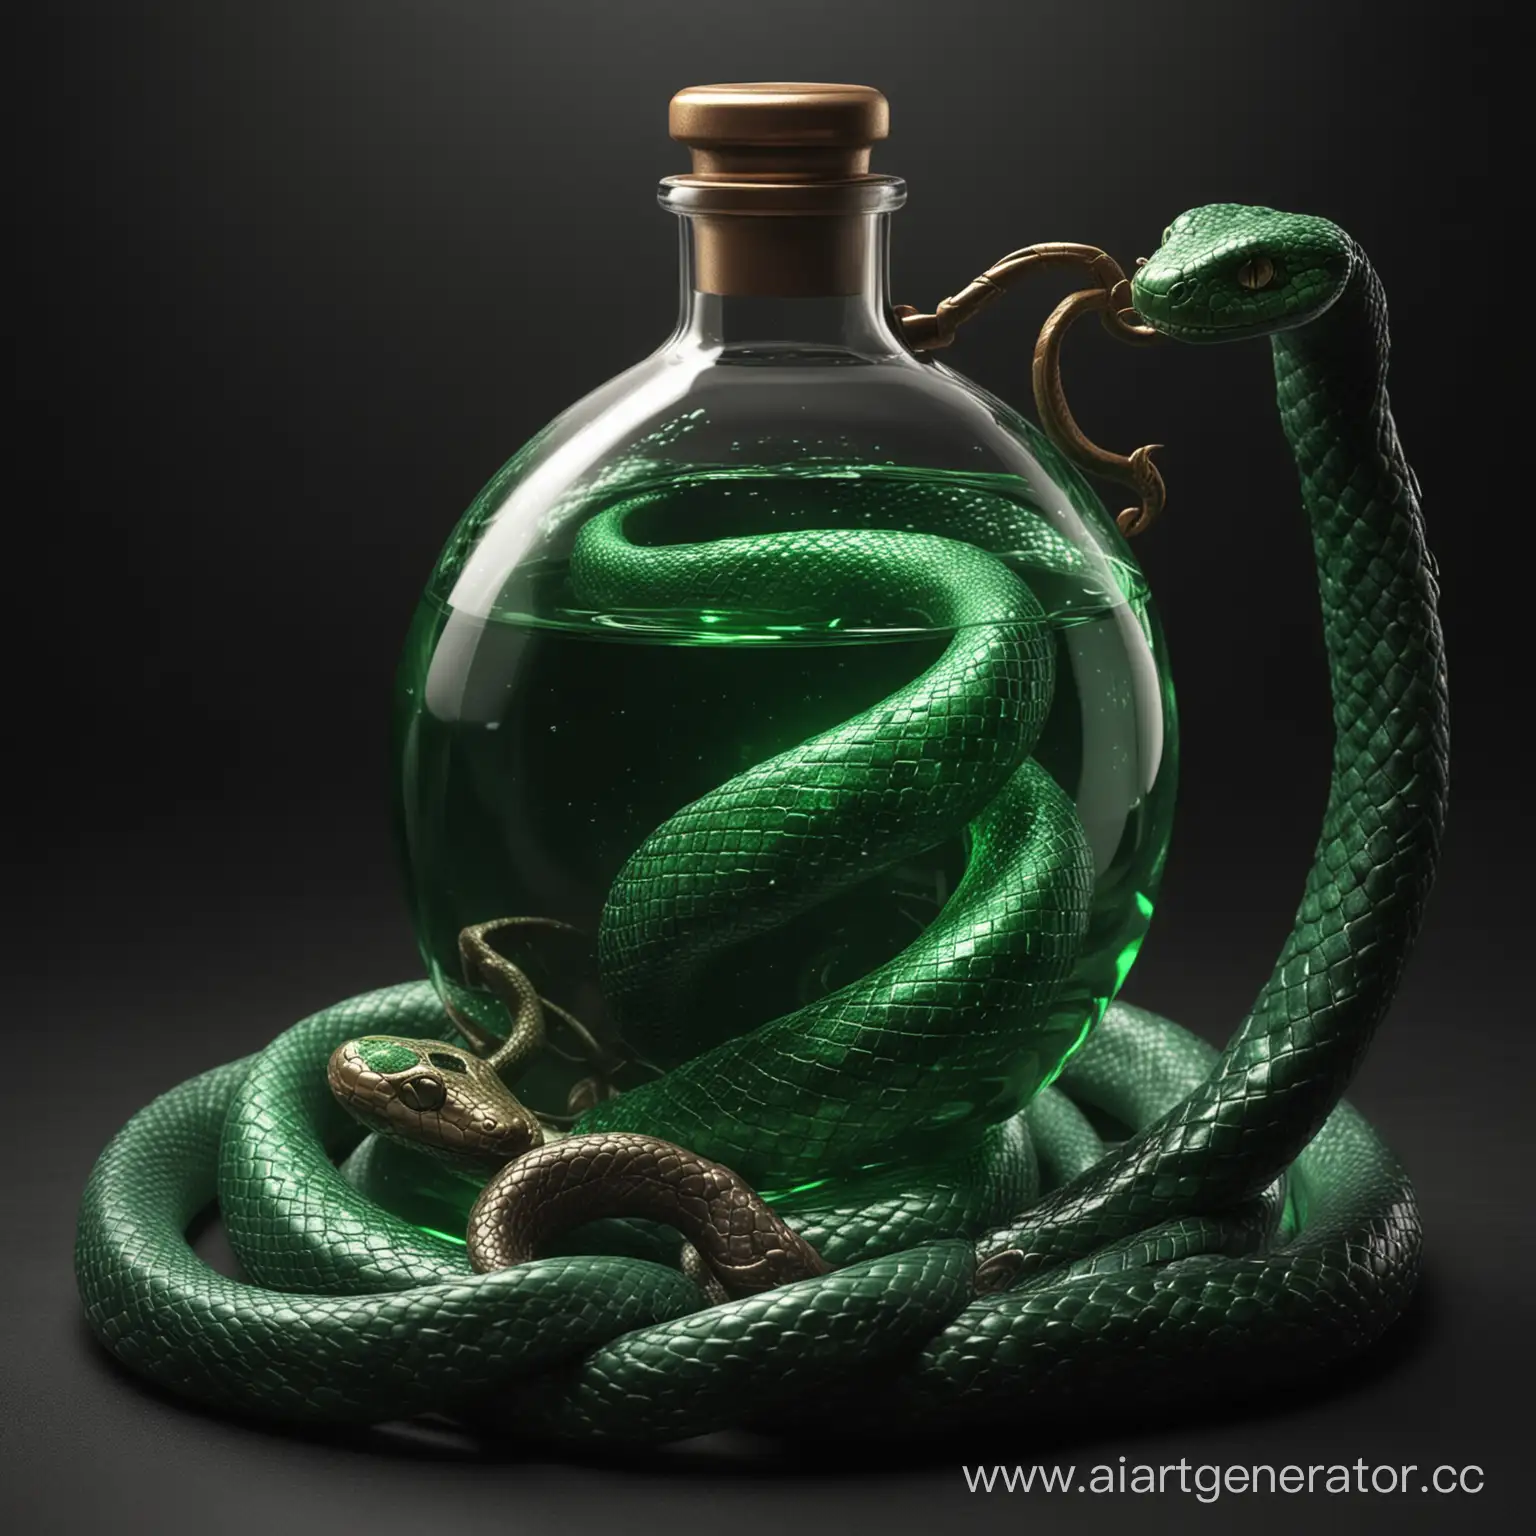 Vivid-Green-Potion-in-Round-Flask-with-Coiled-Snake-on-Black-Background